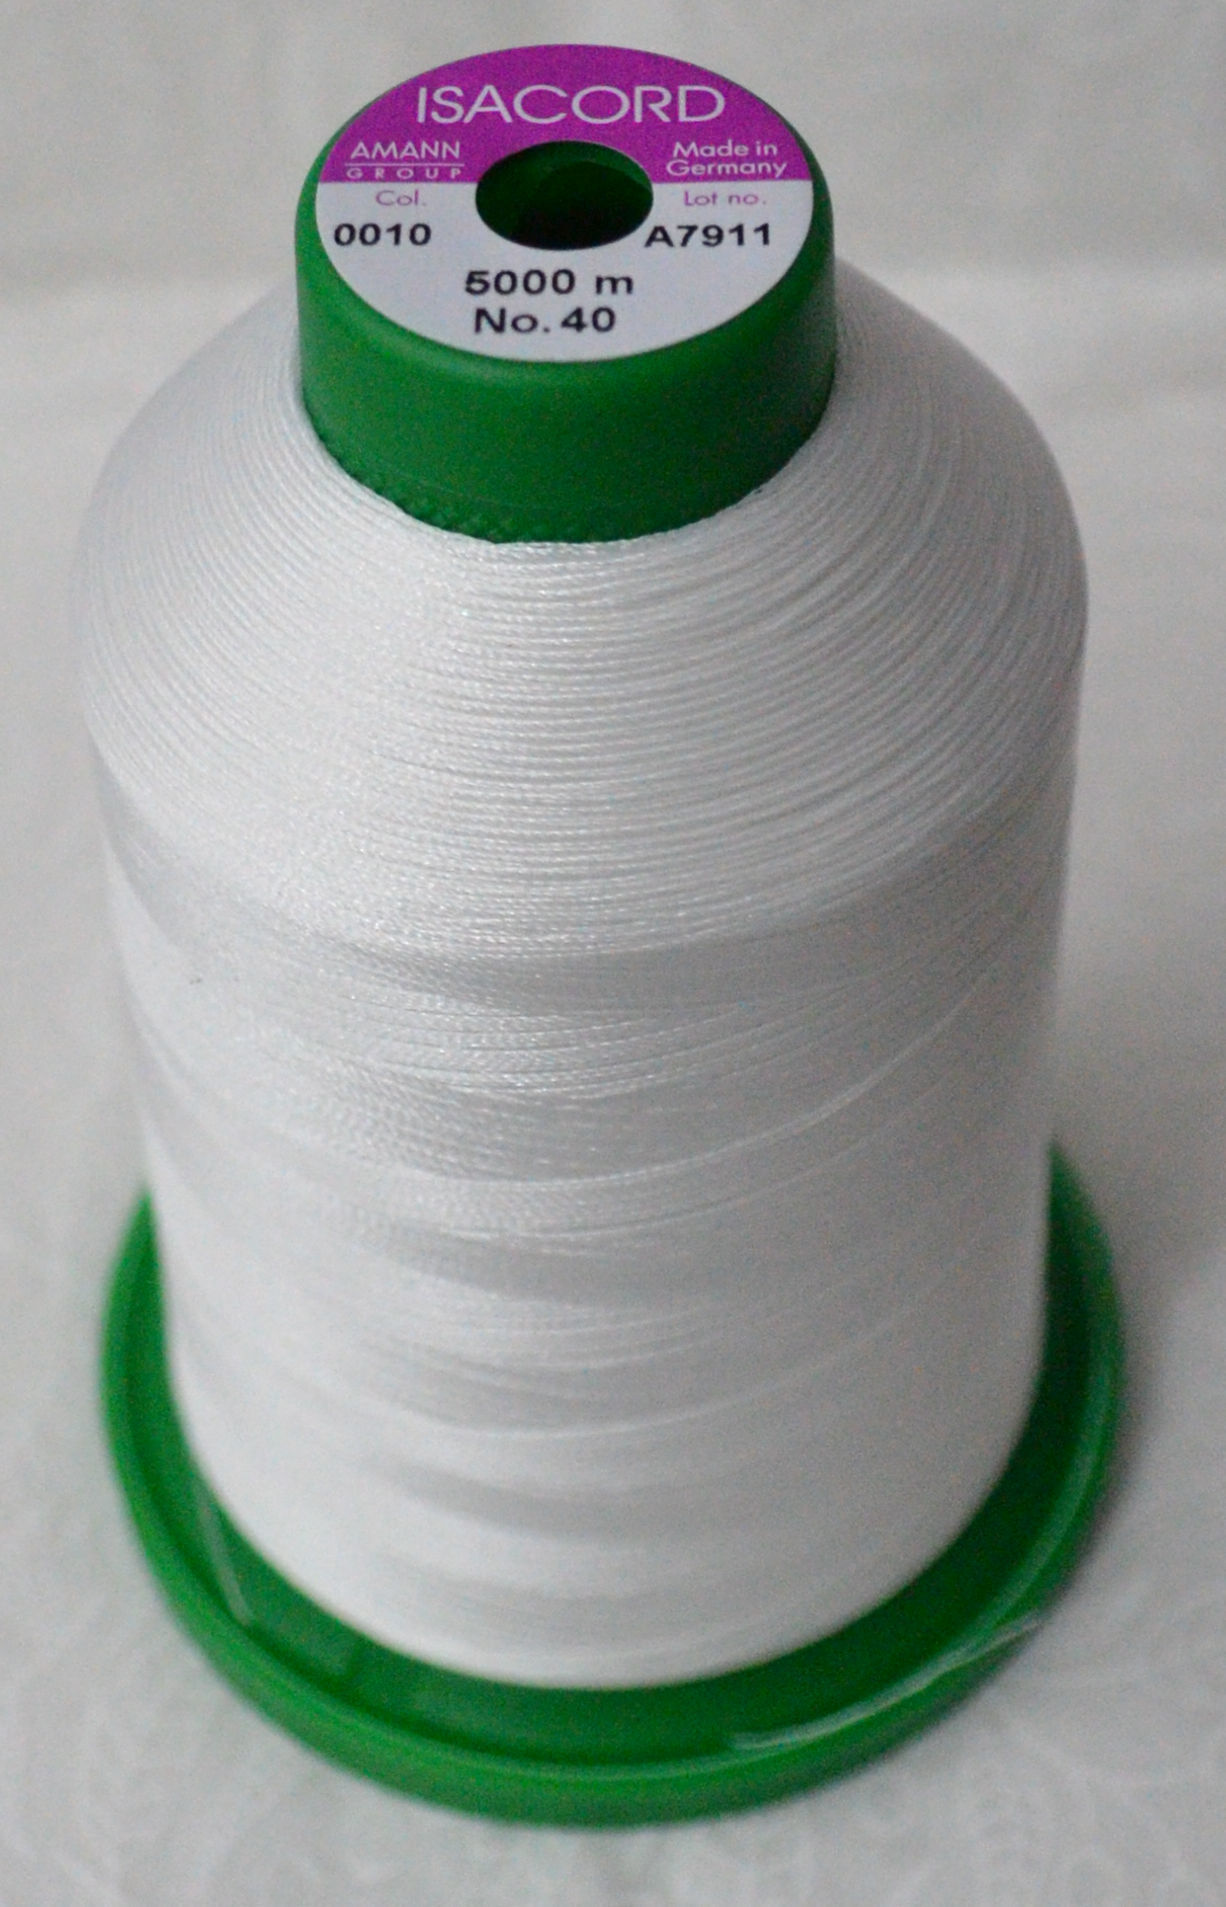 0702 Isacord Embroidery Thread 5000m 0700-0781 